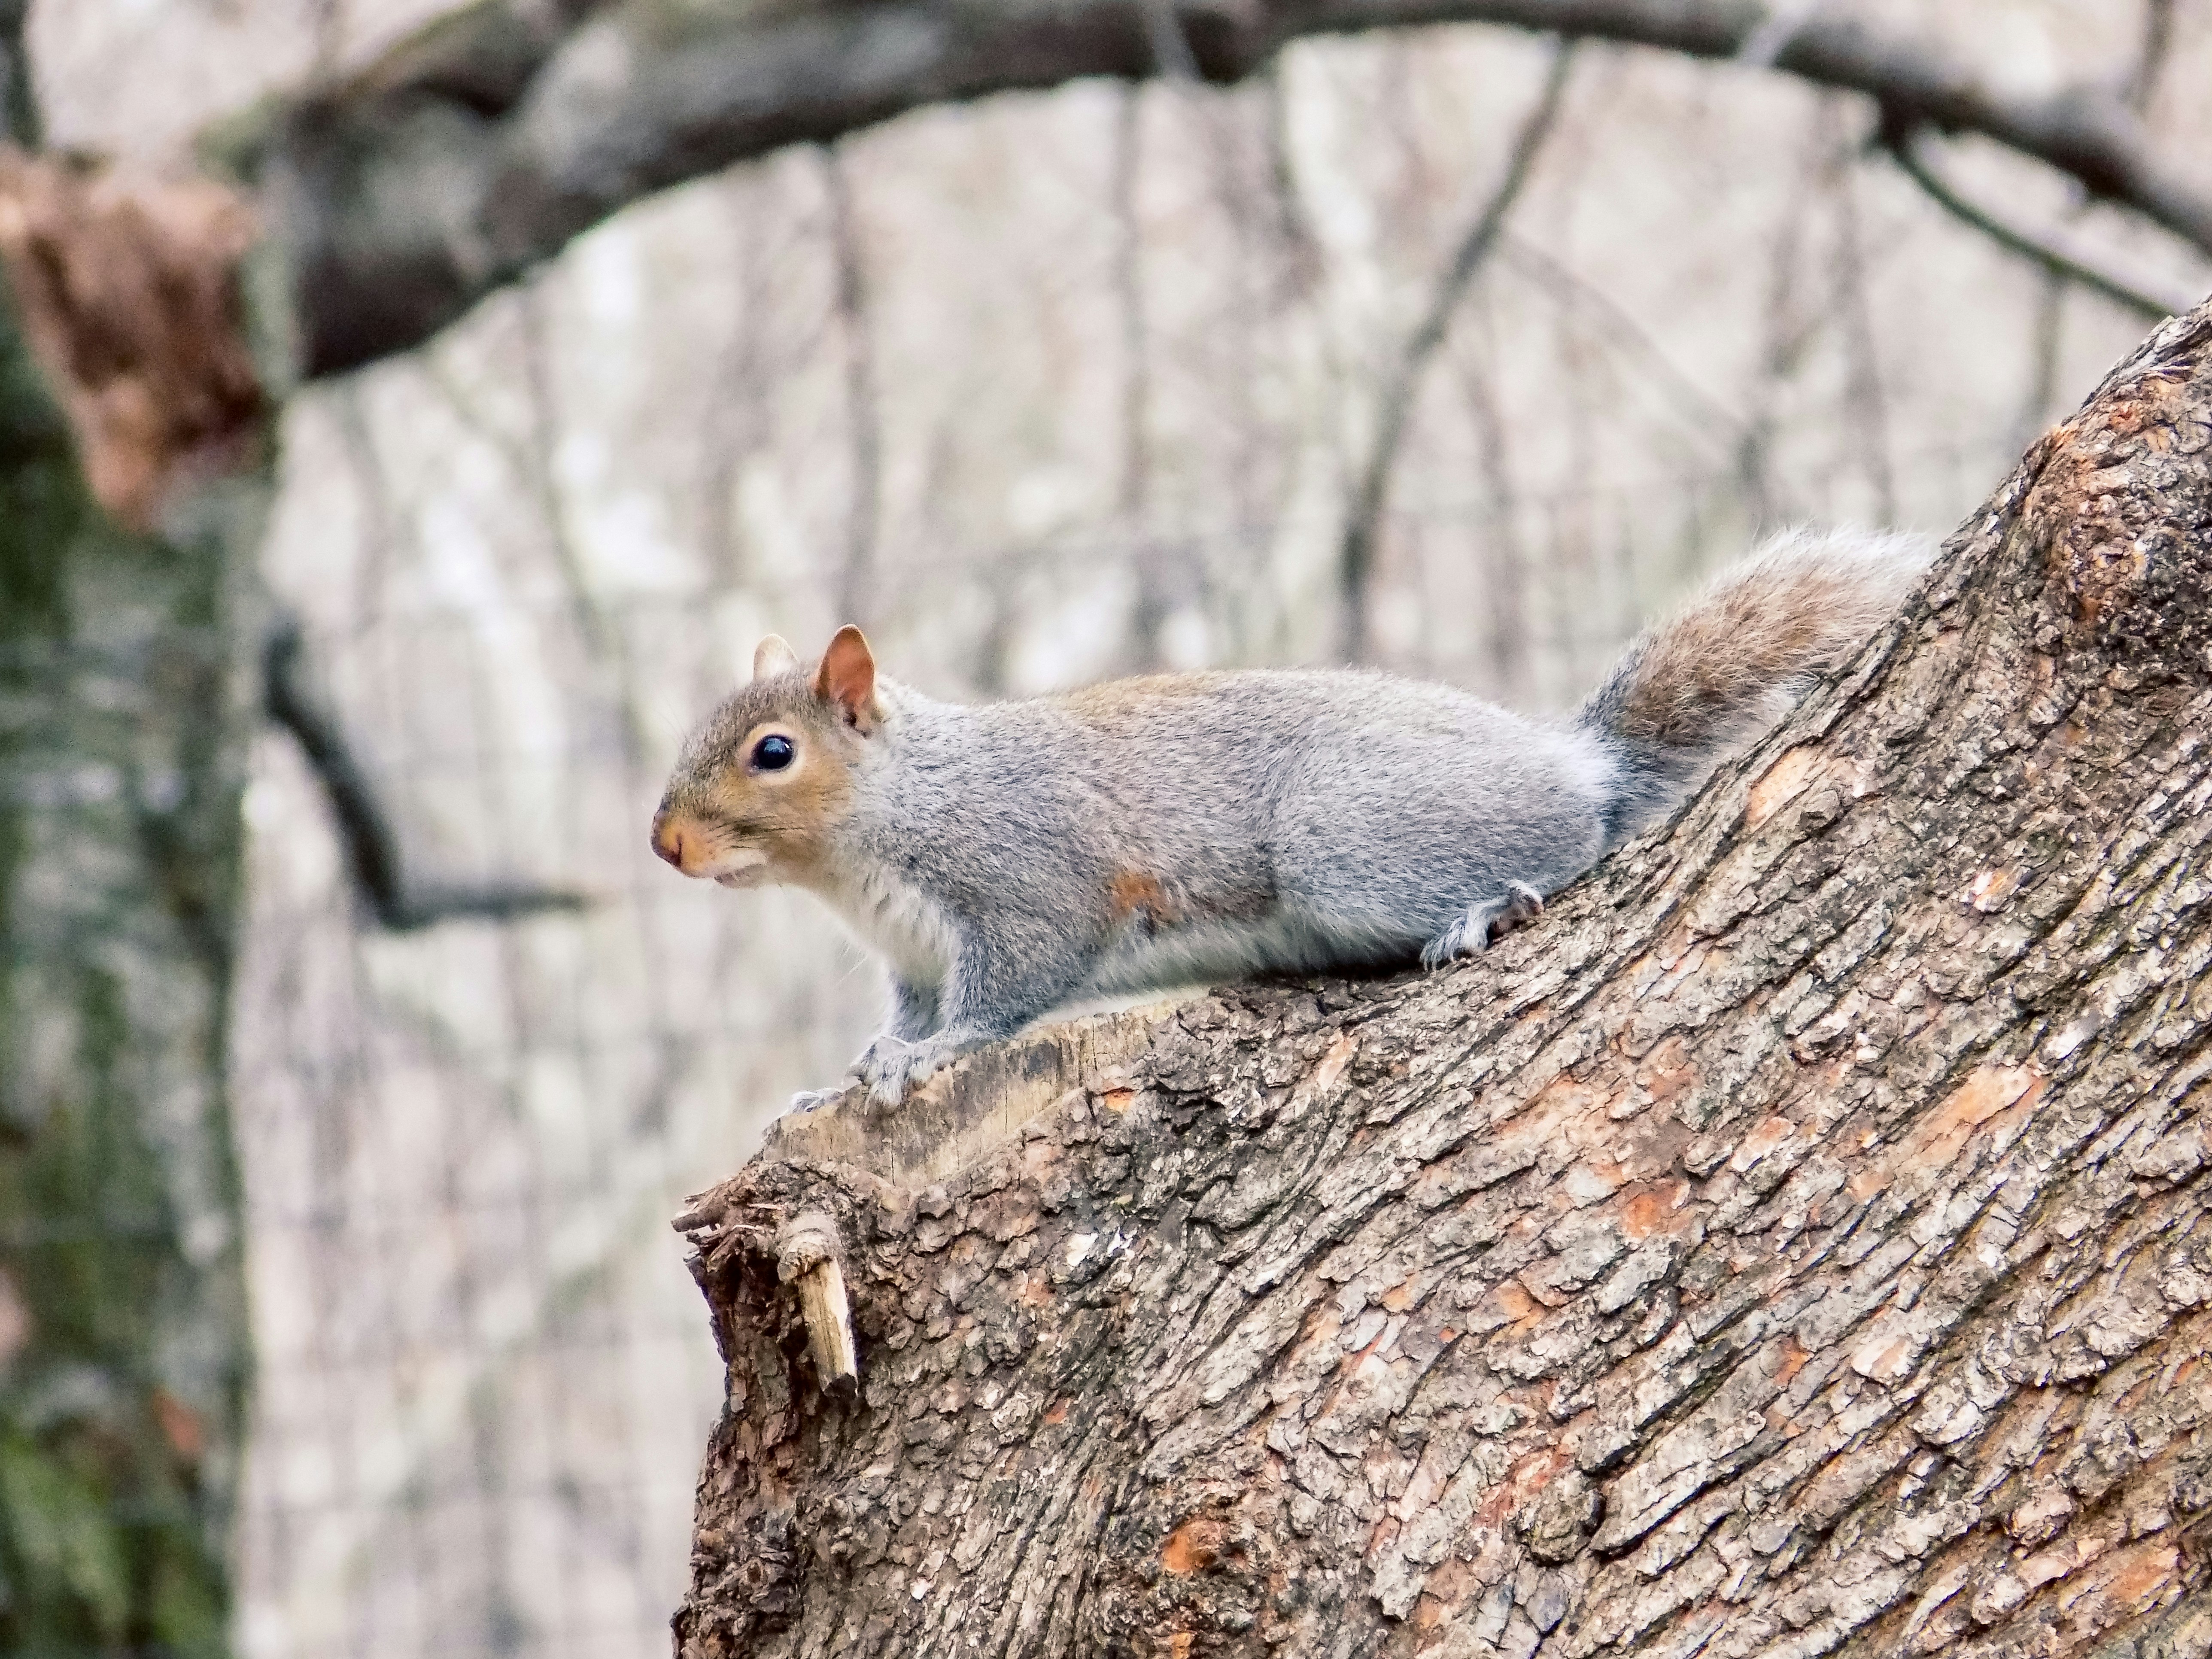 A squirrel in Central Park, NY.